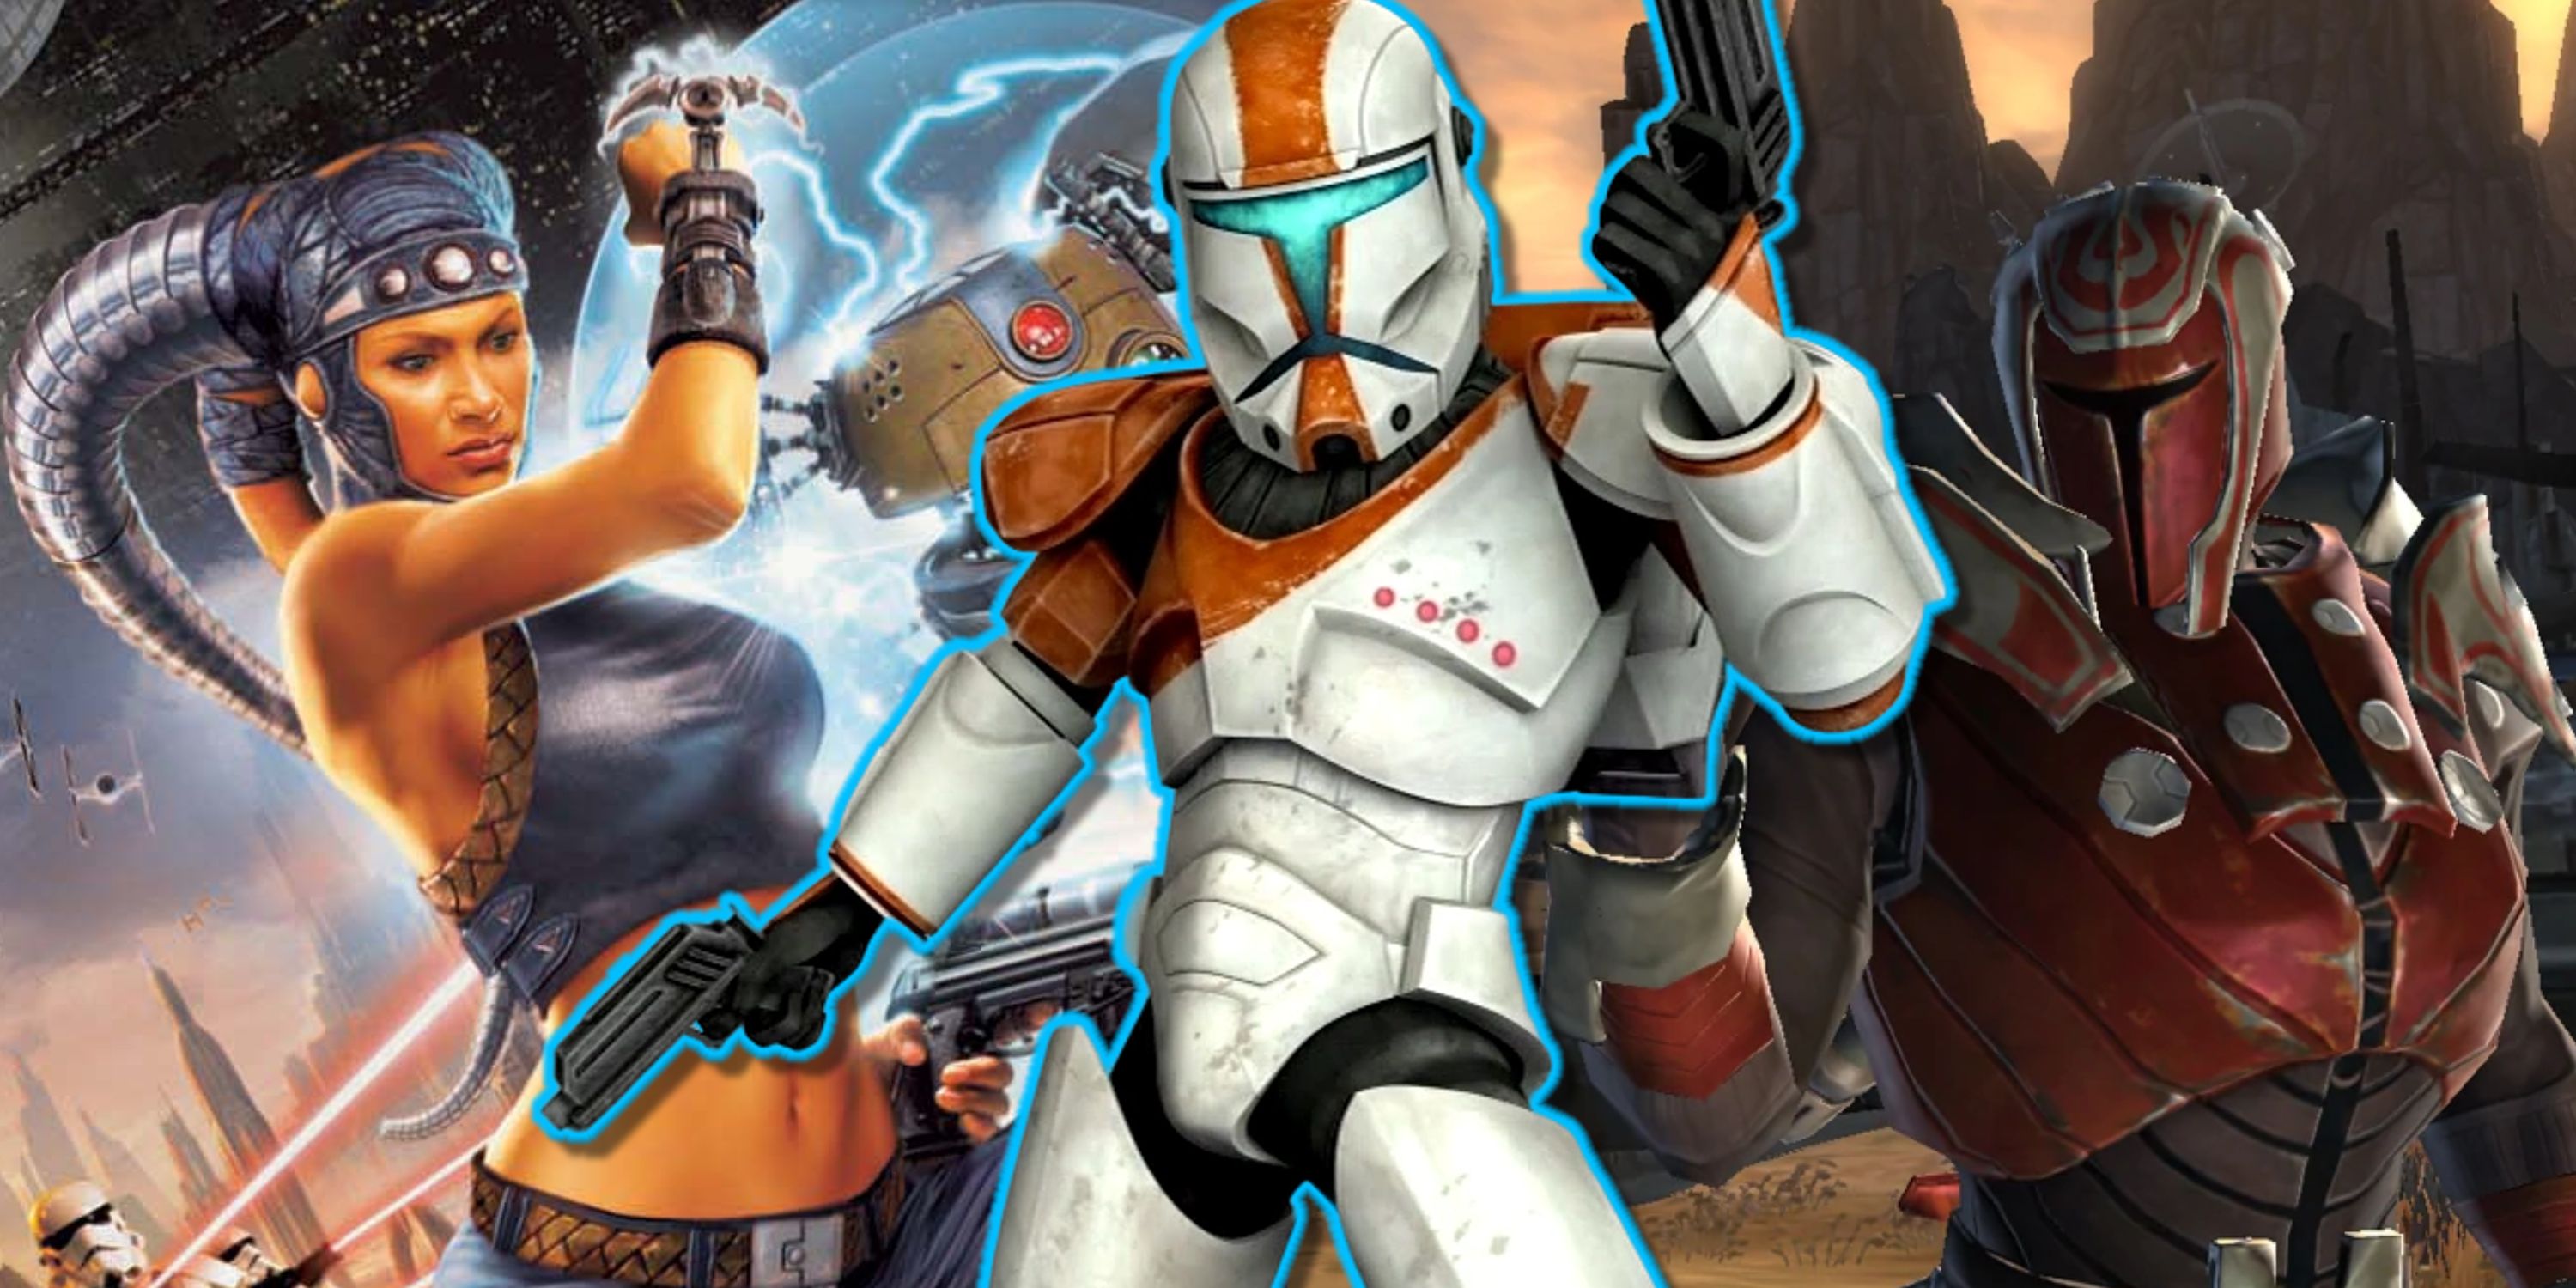 Split image of characters from Star Wars Lethal Alliance, Republic Commando, and The Old Republic